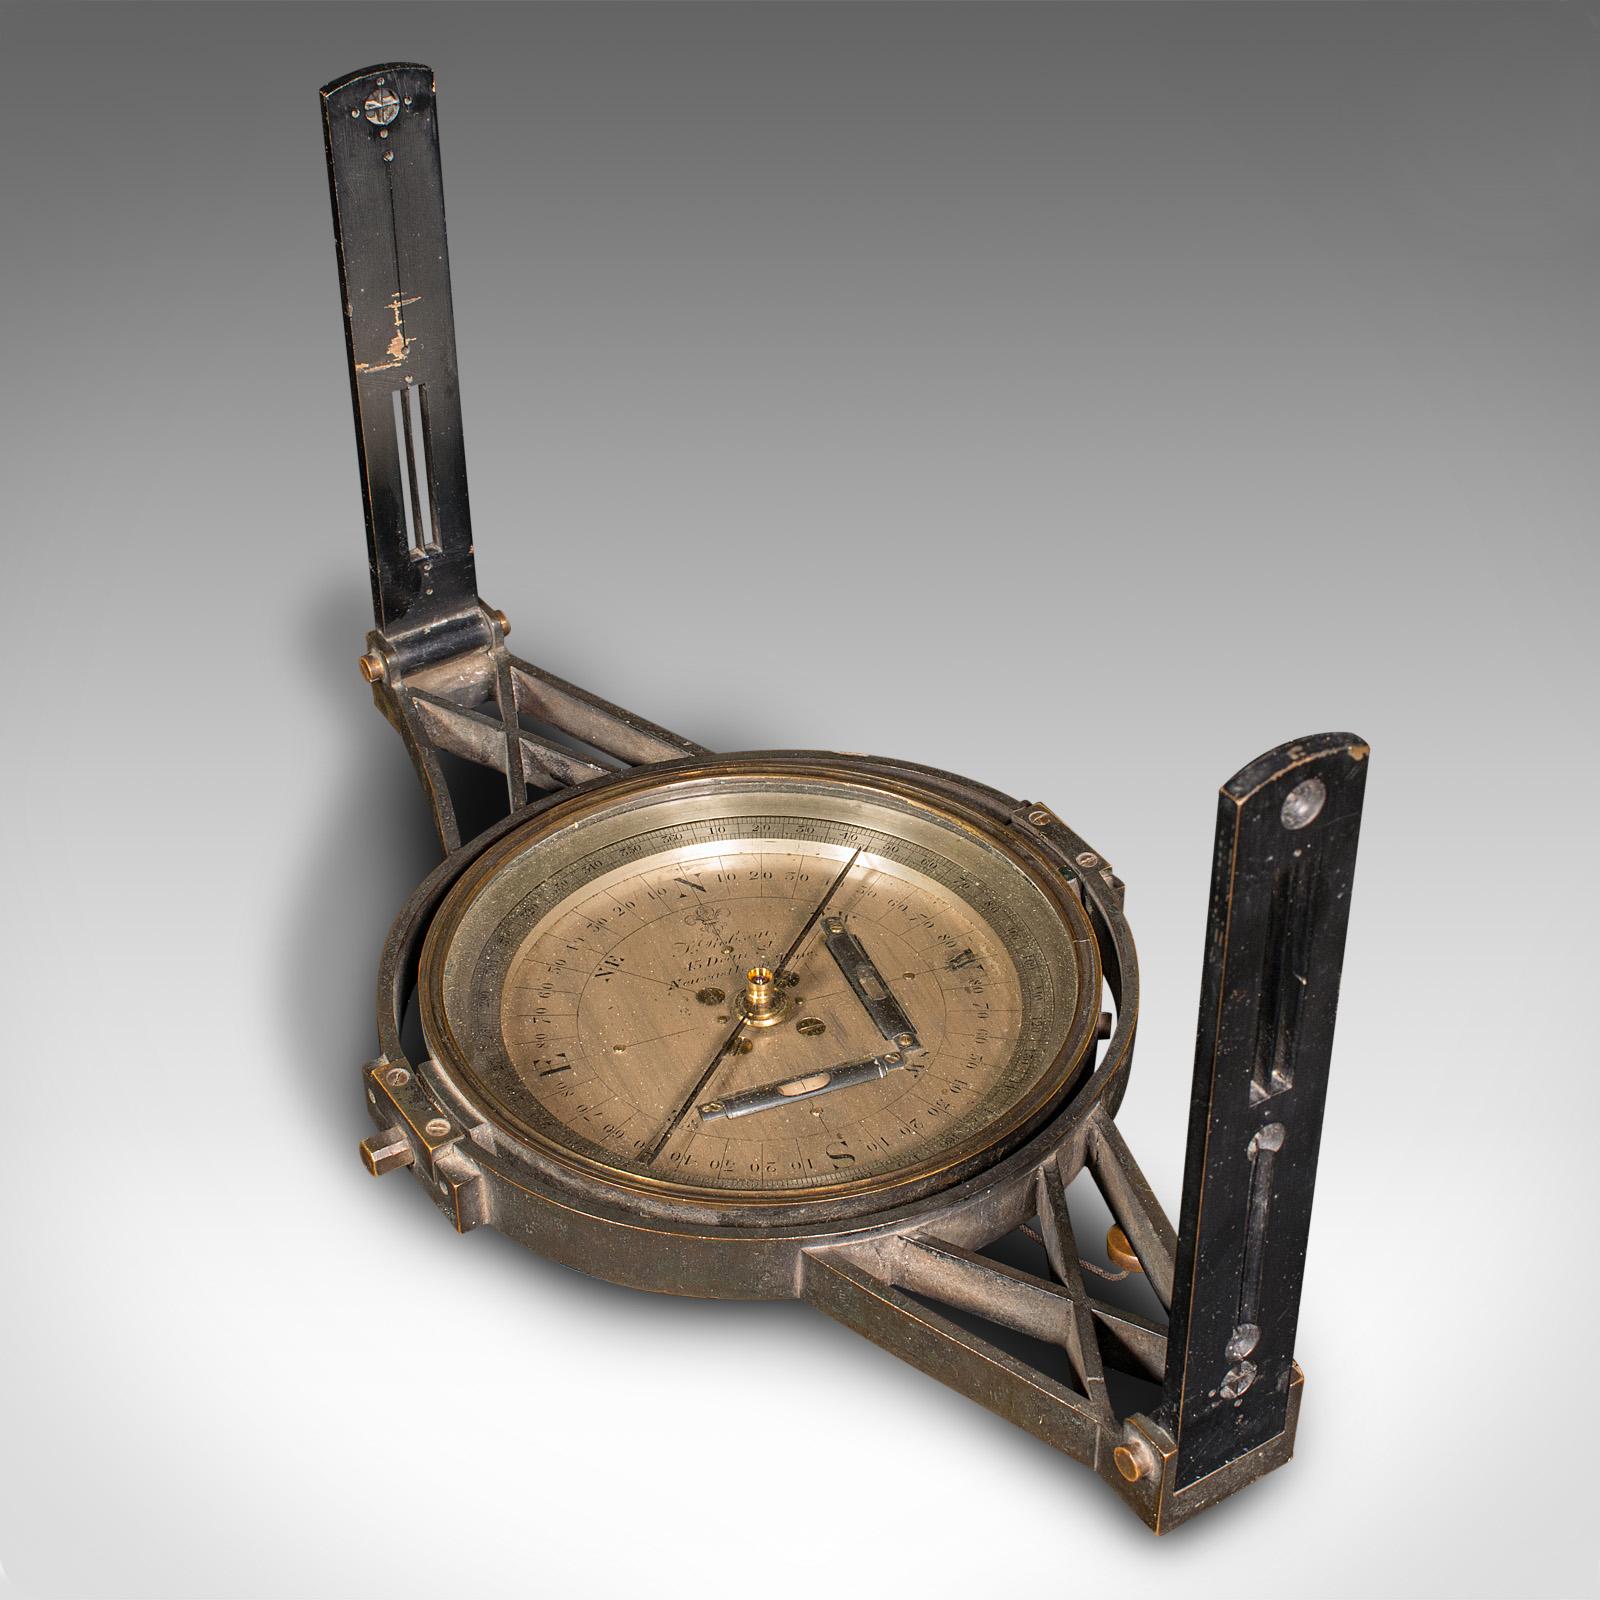 This is an antique gimballed compass. An English, brass and glass decorative scientific instrument for display, dating to the late Victorian period, circa 1900.

Fascinating decorative compass, replete with carry case
Displays a desirable aged